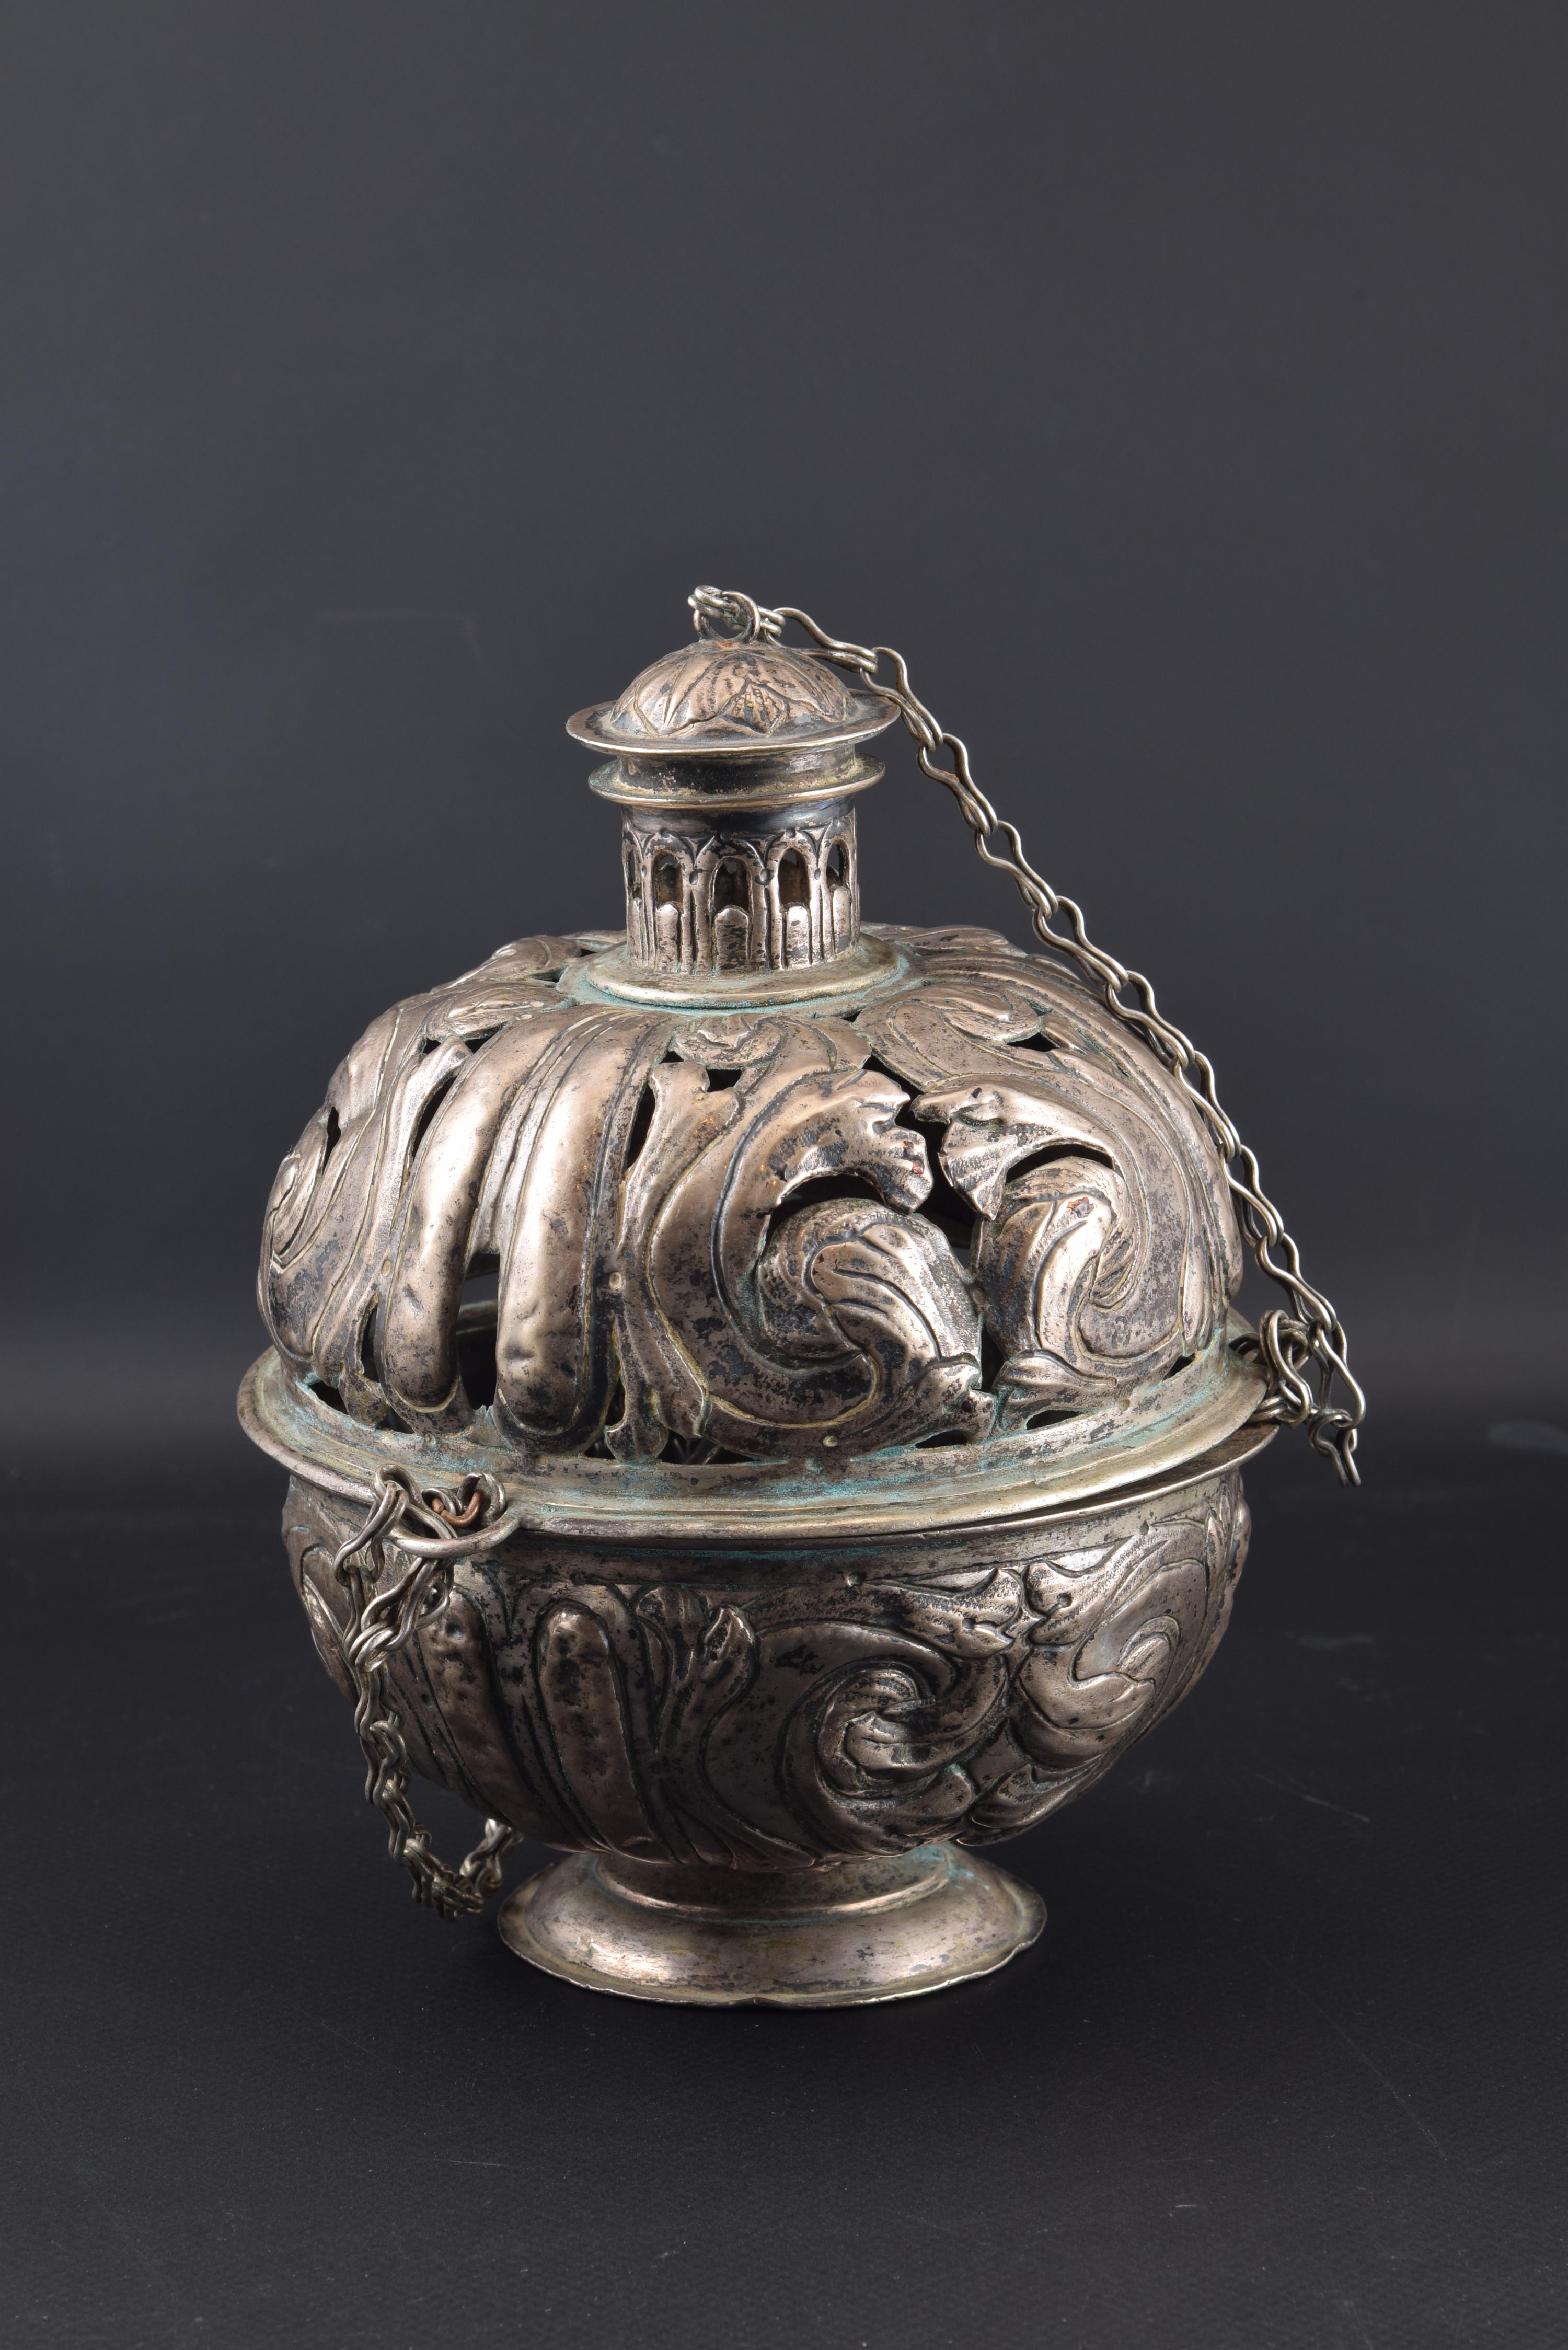 18th Century and Earlier Silver Incense Burner, Spain, 17th Century